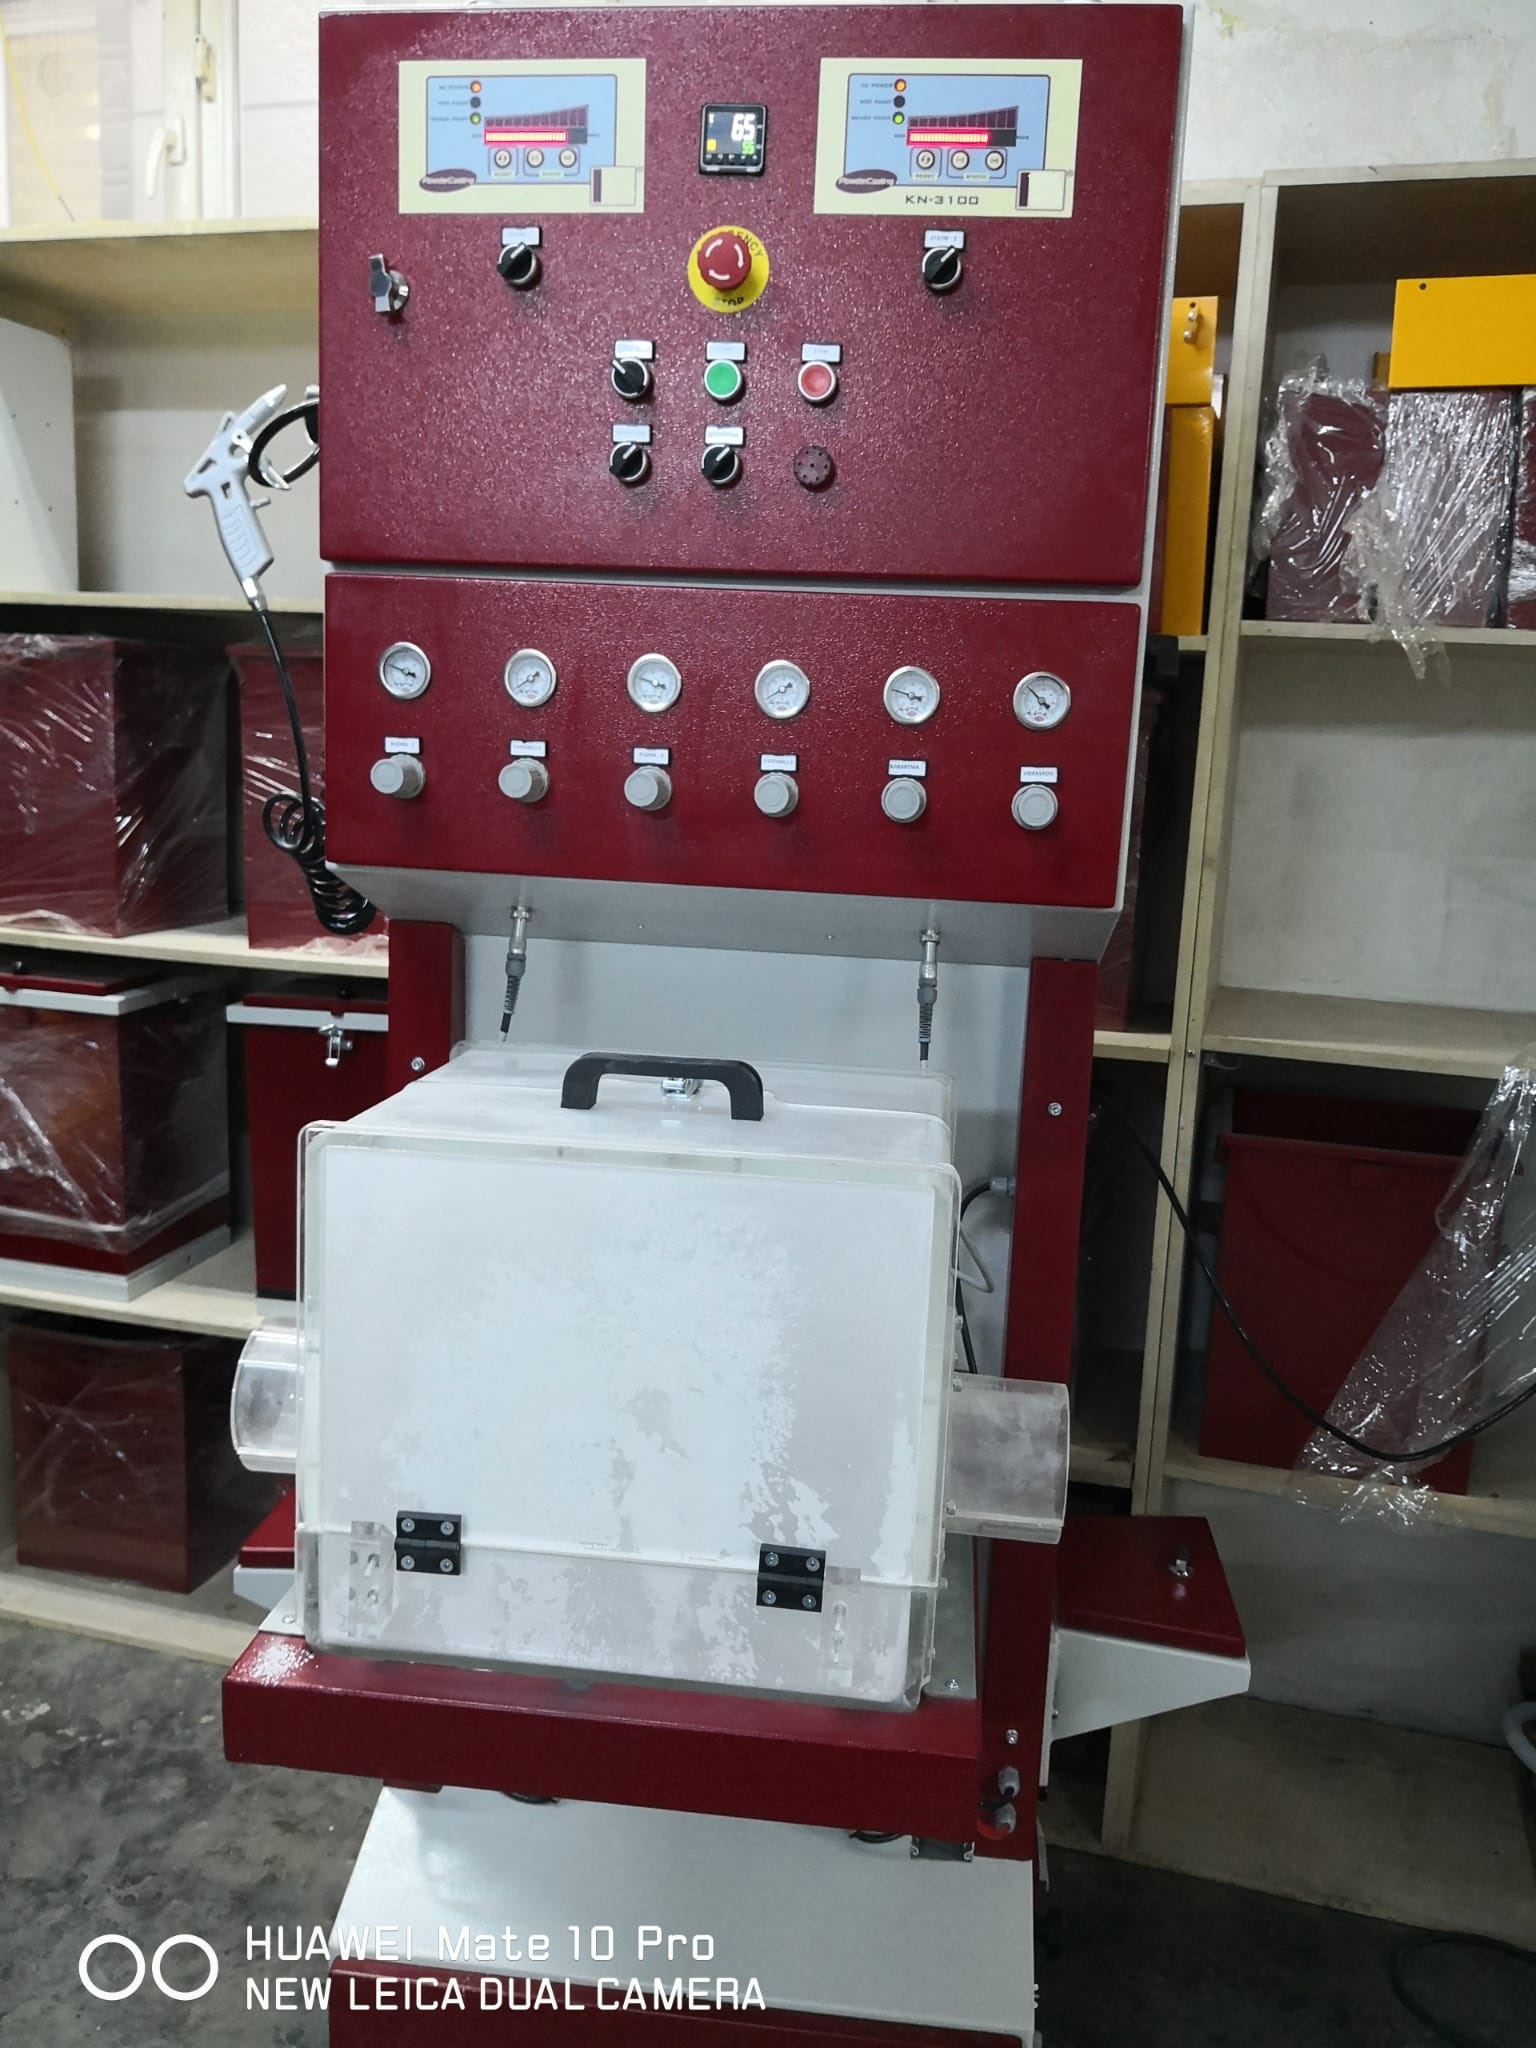 Powder and Talc Coating Equipment for Cable and Wires